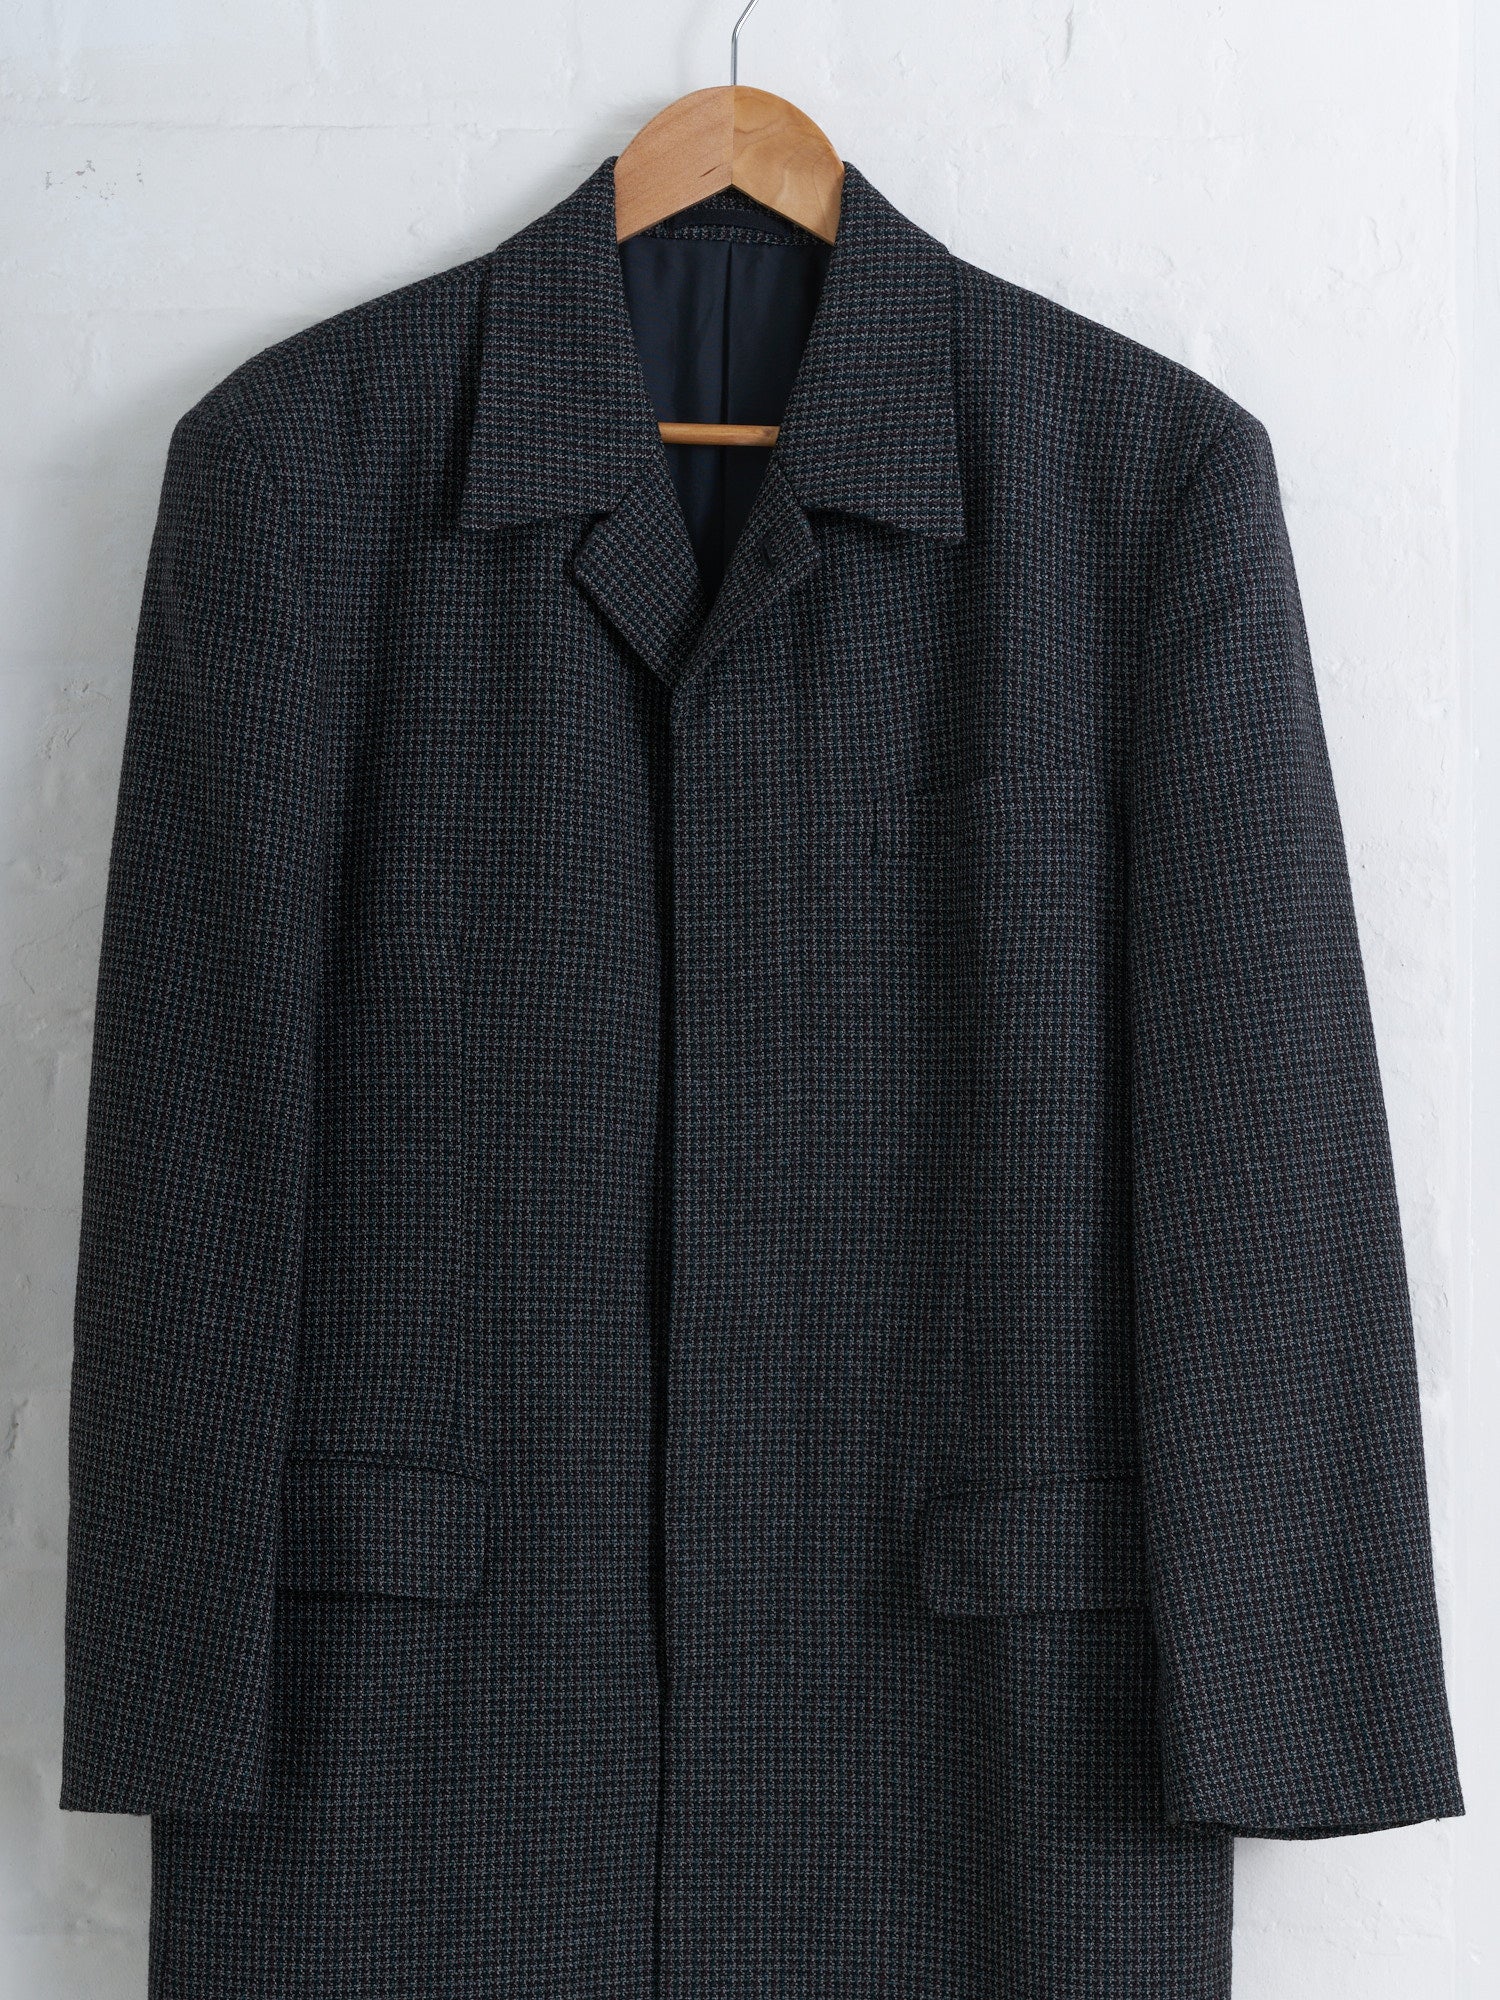 Comme des Garcons Homme 1997 grey wool houndstooth covered placket coat - M S